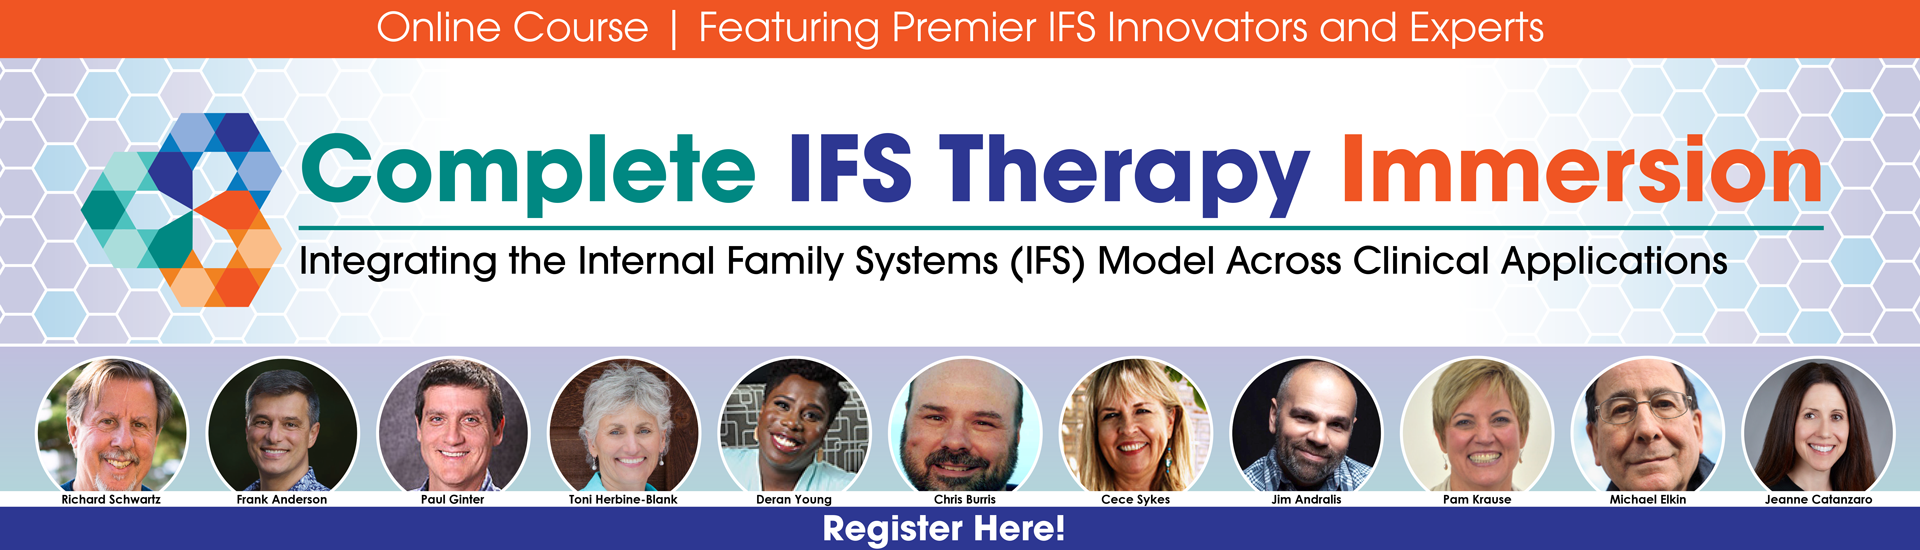 Complete IFS Therapy Immersion Live Online Course